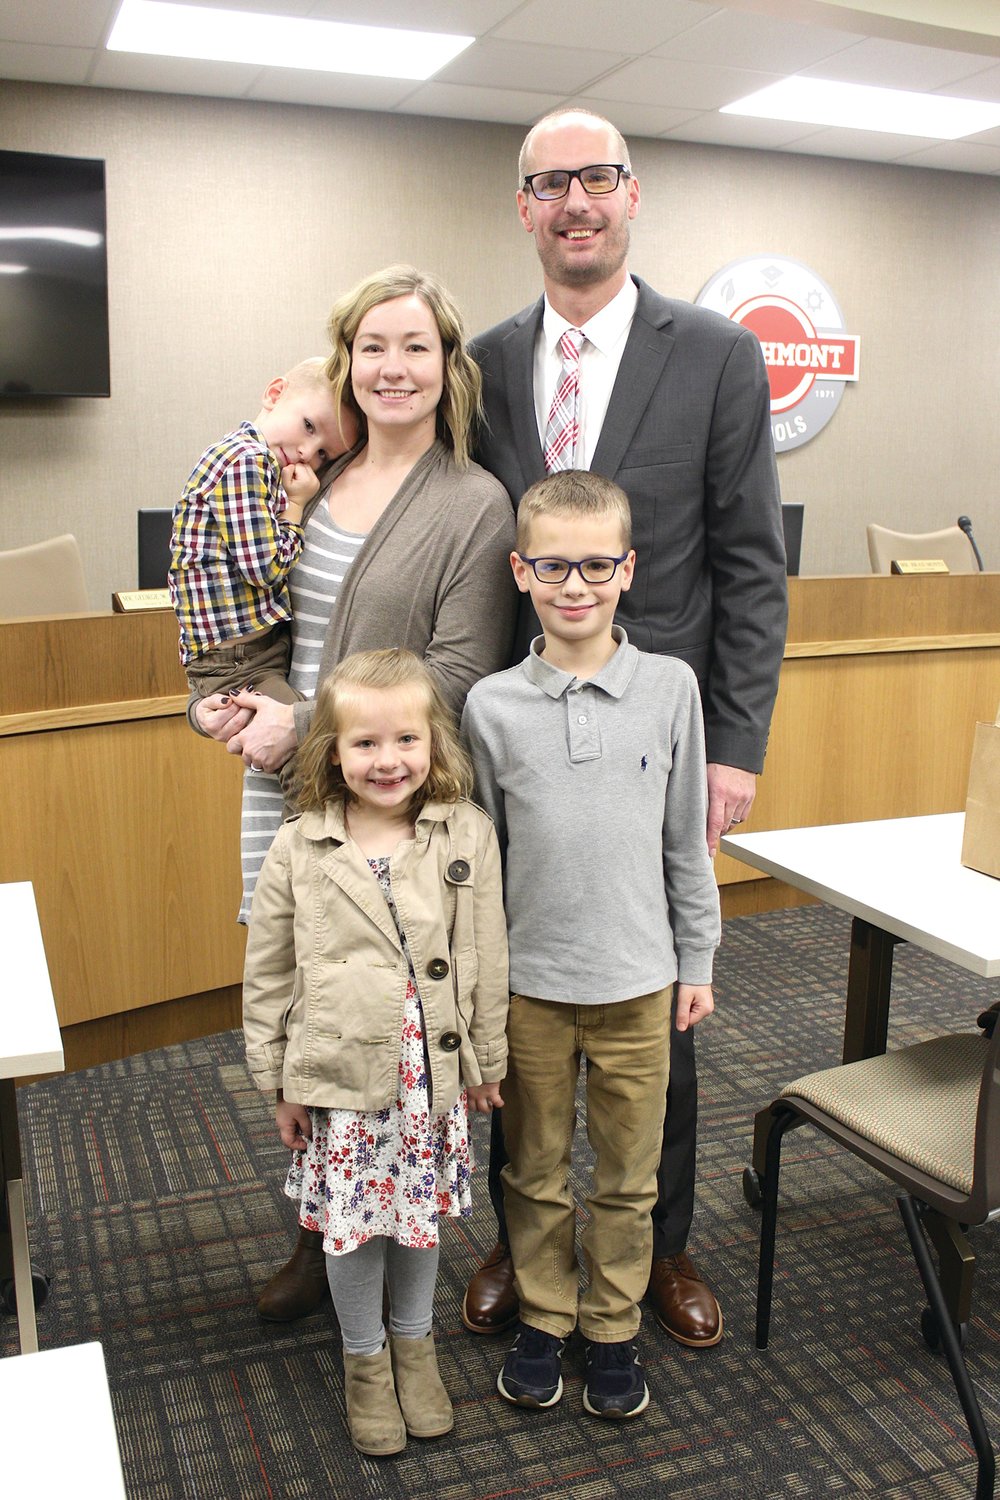 Jesse Burgess, newly hired as principal at Southmont High School, stands tall with his after receiving approval from the Southmont school board Monday. Burgess was accompanied by his family Monday, including his wife Jenna, his six-year-old daughter Cora and sons Caleb, standing, and Knox.